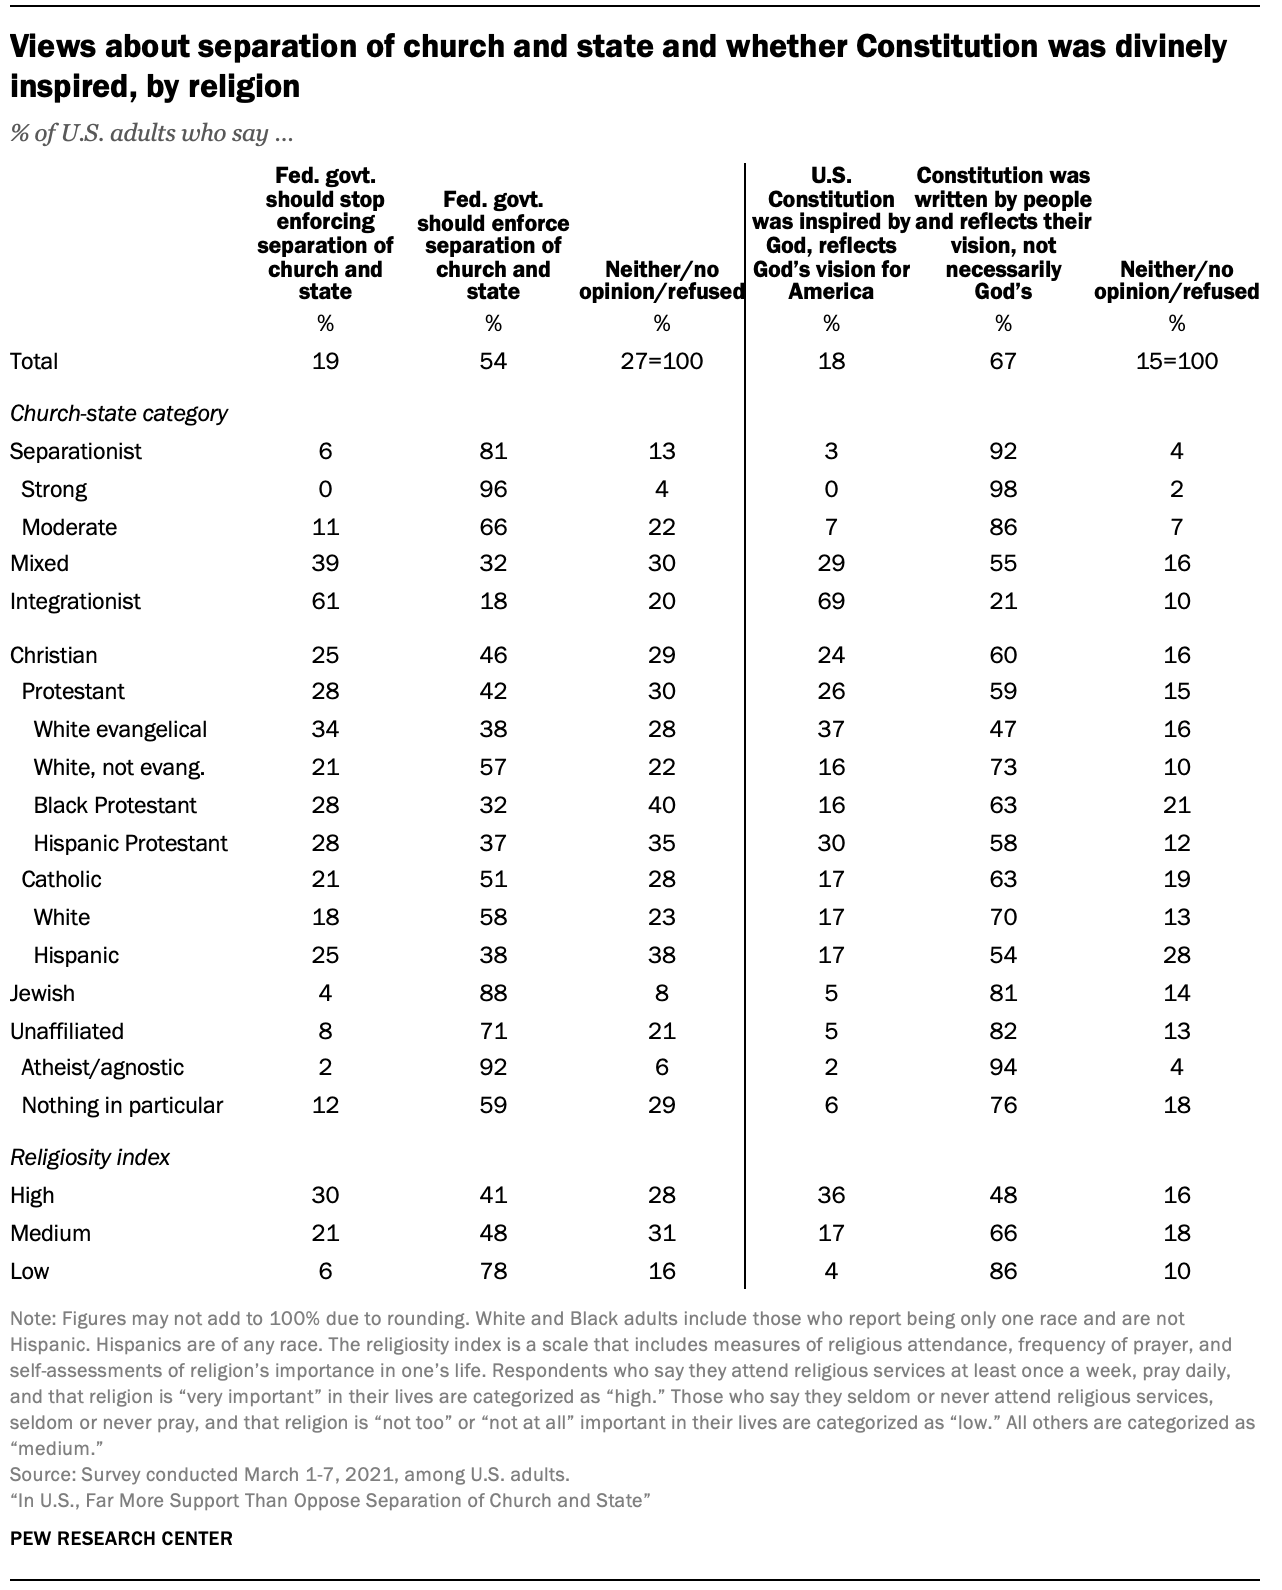 Views about religious displays on public property and prayer in schools, among demographic groups